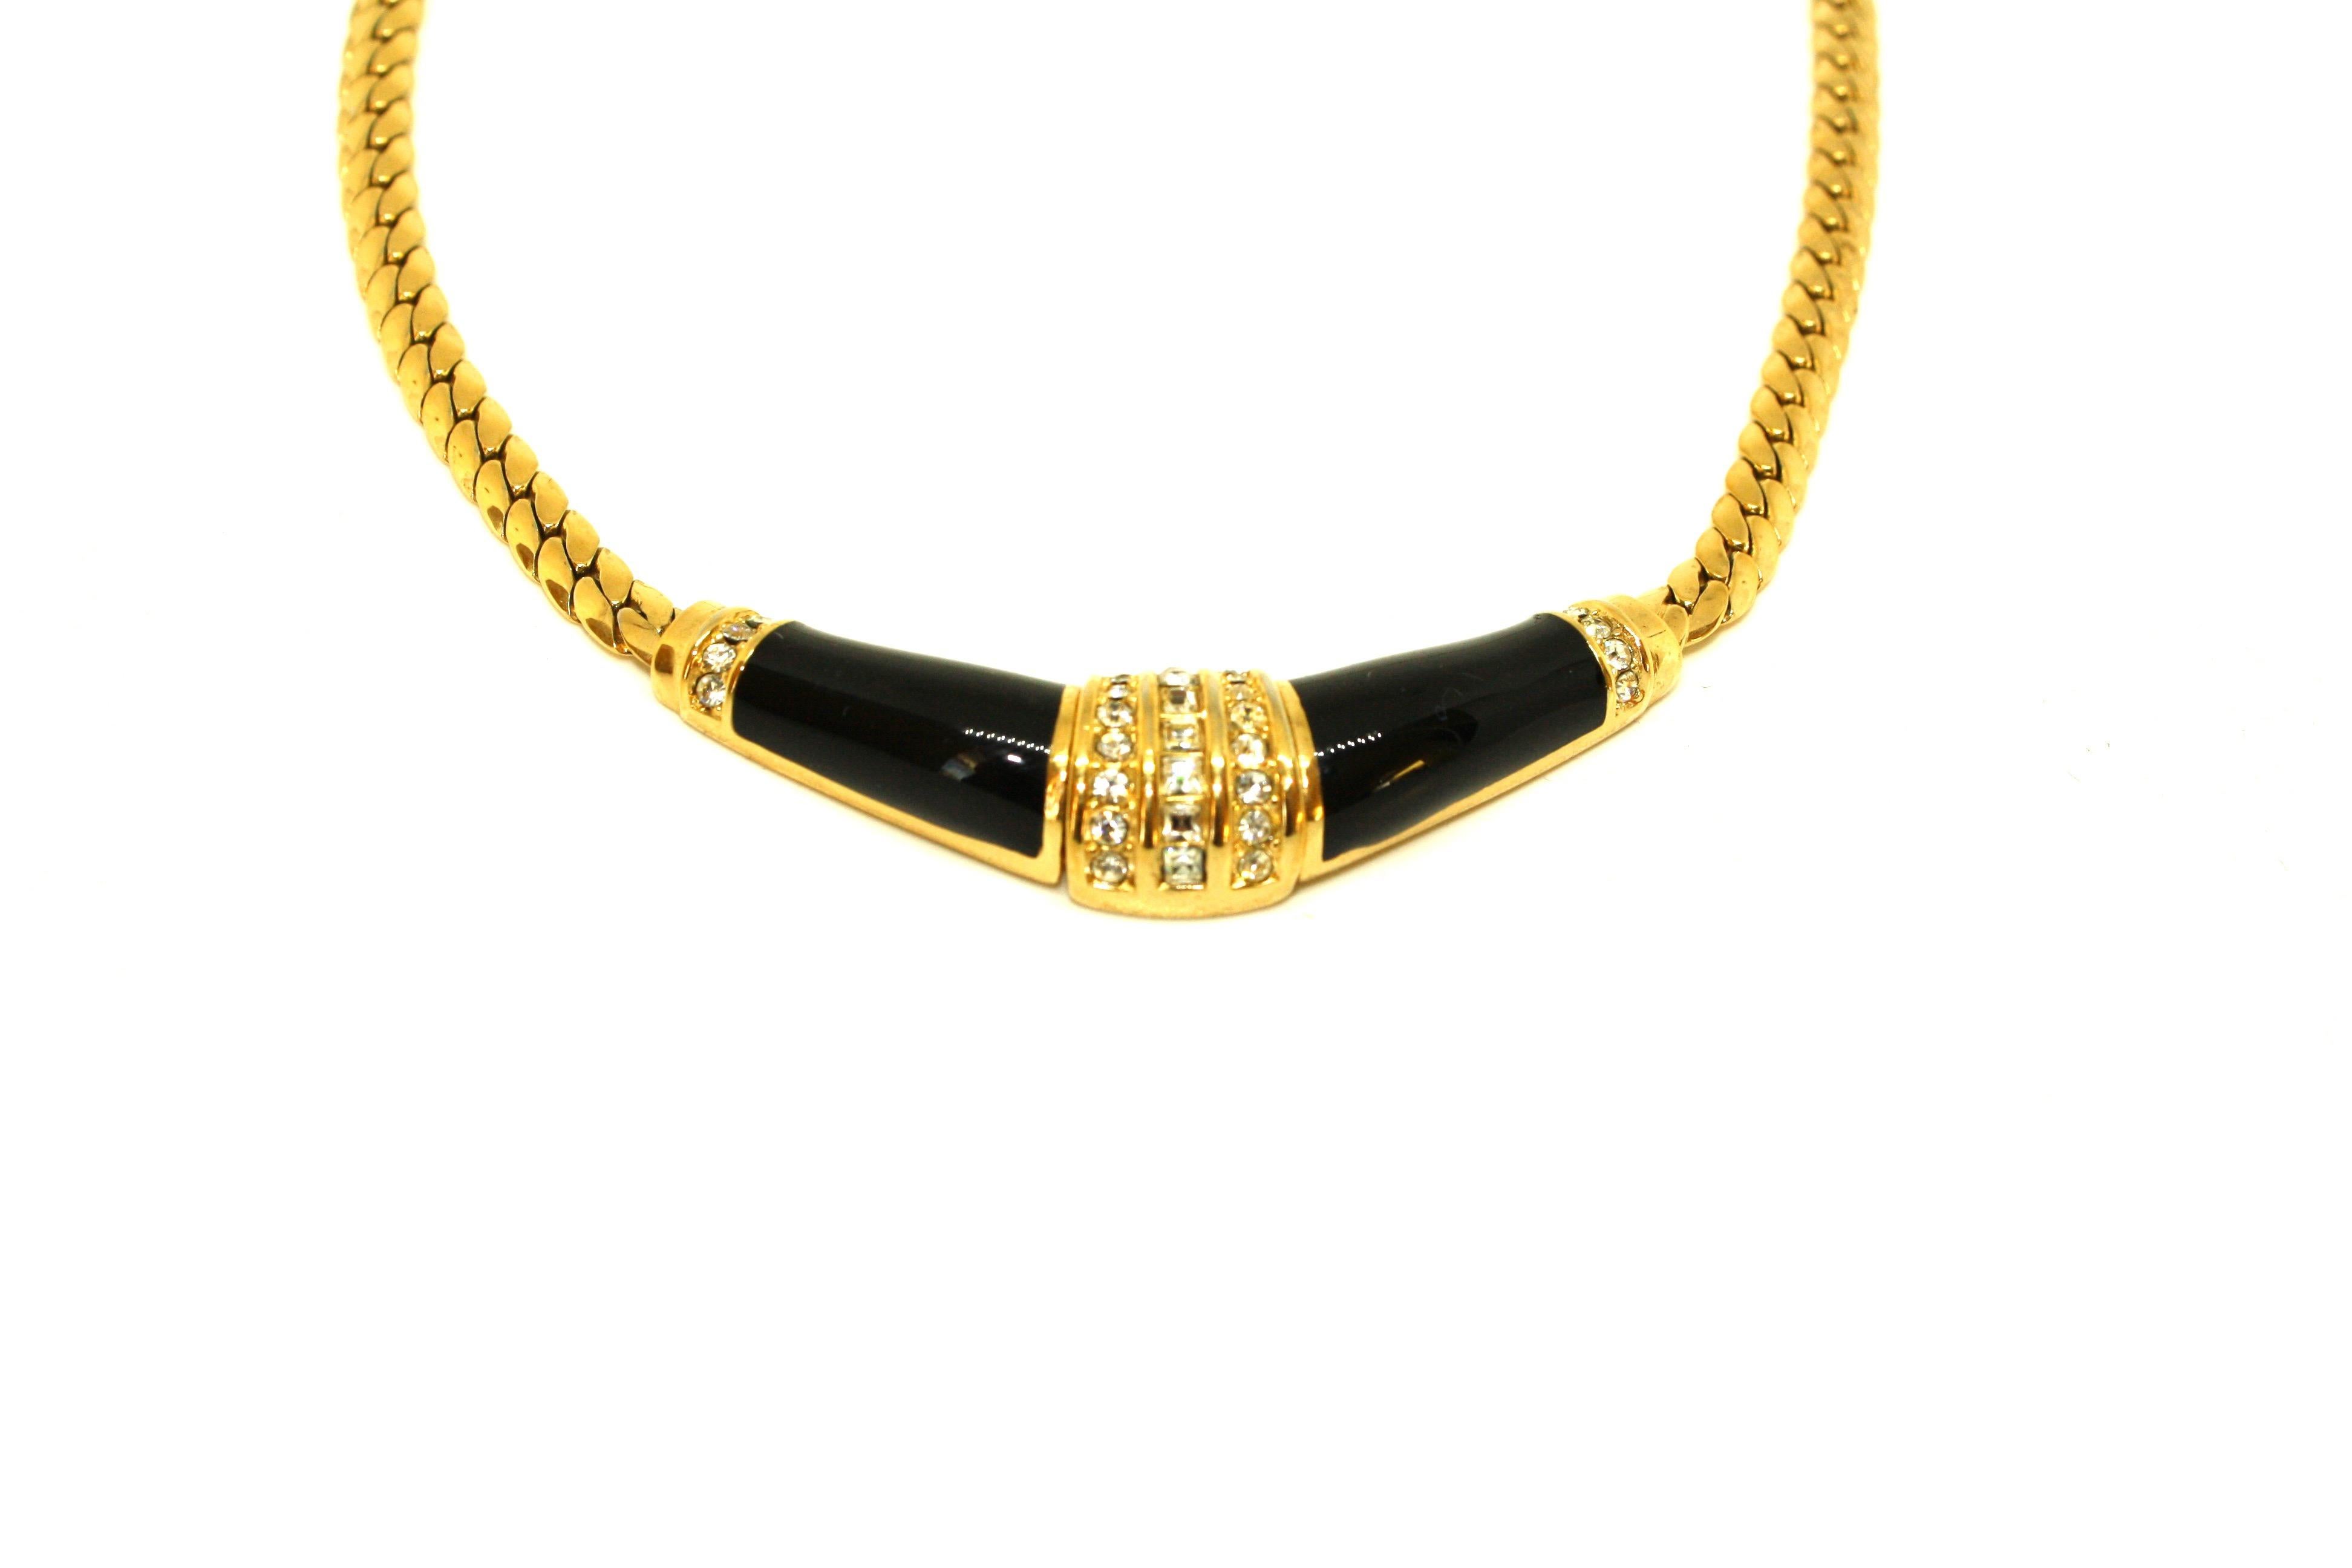 Dated to the 1980's, this fabulous necklace by Christian Dior will add a sophisticated and glamorous touch to any outfit. The black enamel is complimented by small glittering white diamante round and square stones.  The extension chain means it can